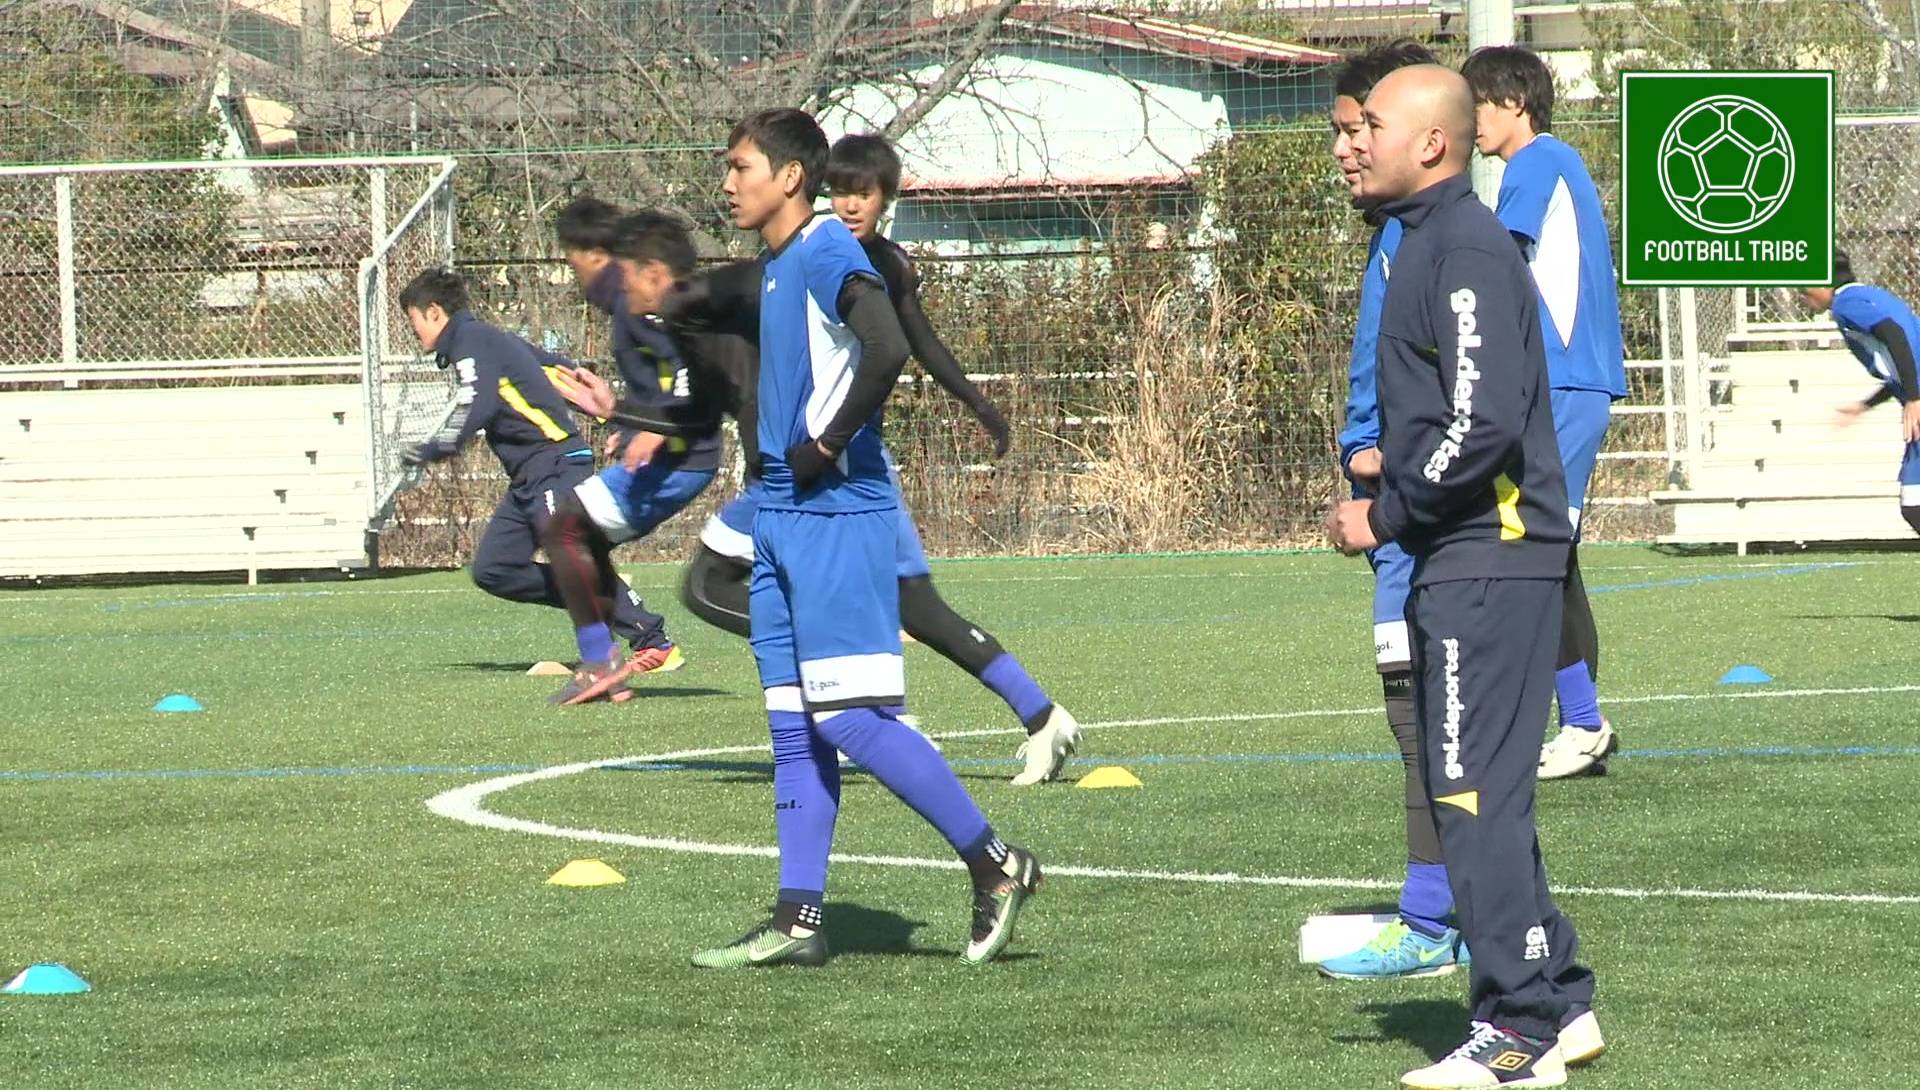 VIDEO: Vathanaka’s first J.League practice ends early